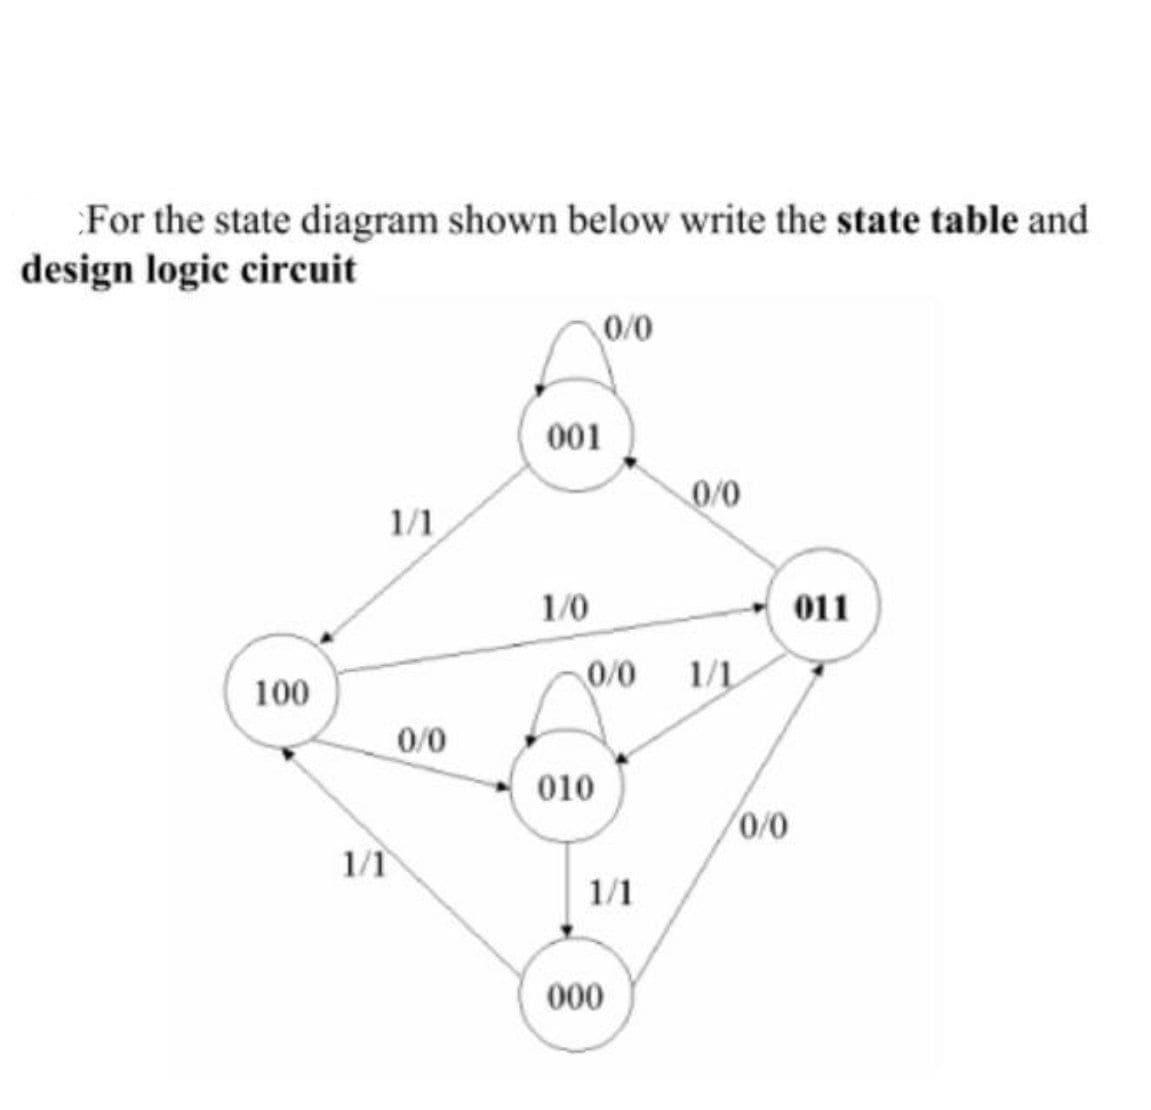 For the state diagram shown below write the state table and
design logic circuit
0/0
001
0/0
1/1
1/0
011
0/0
1/L
100
0/0
010
0/0
1/1
1/1
000
